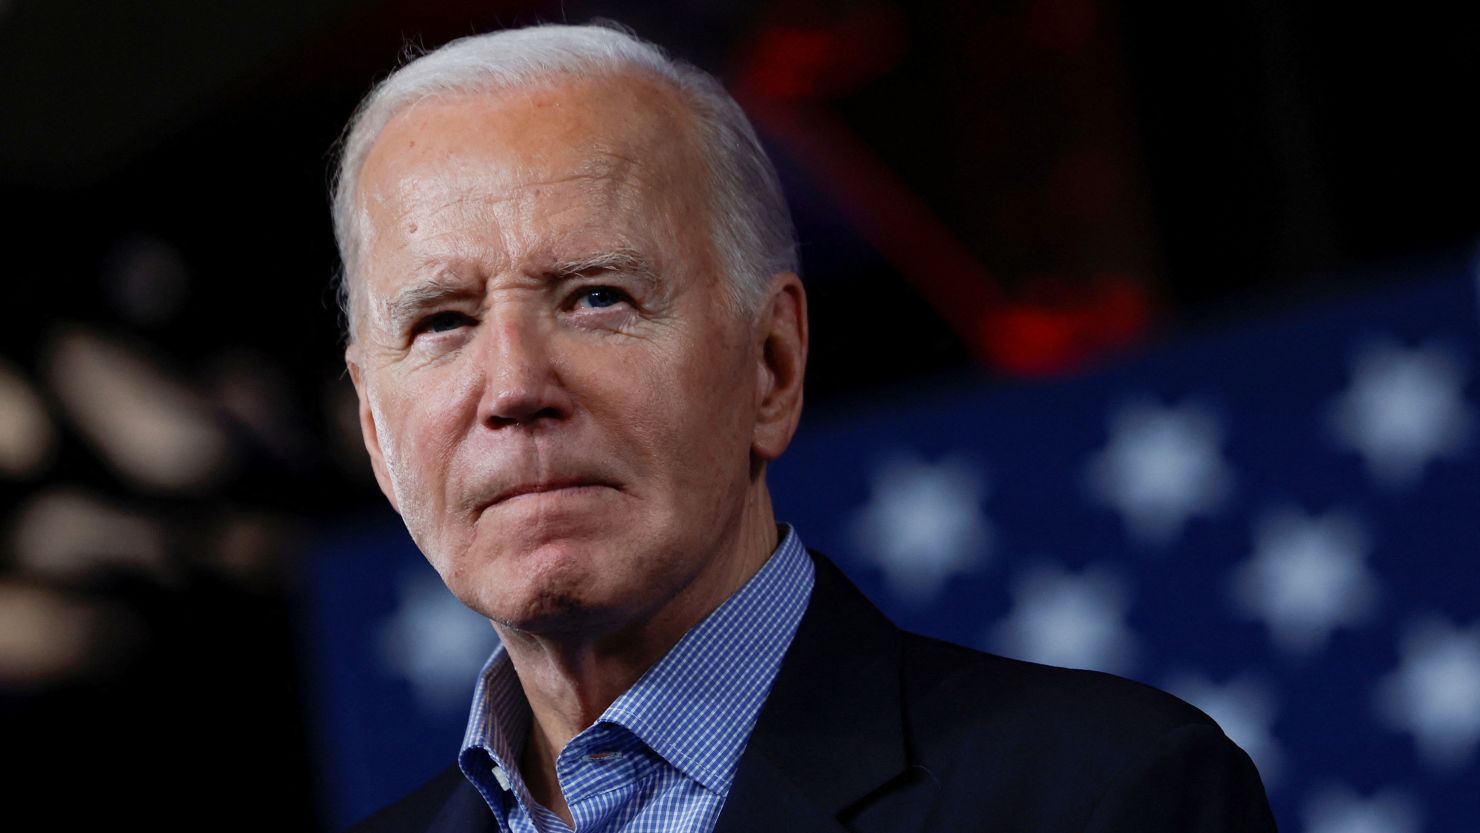 President Joe Biden looks on during a campaign event at Pullman Yards in Atlanta on March 9, 2024.